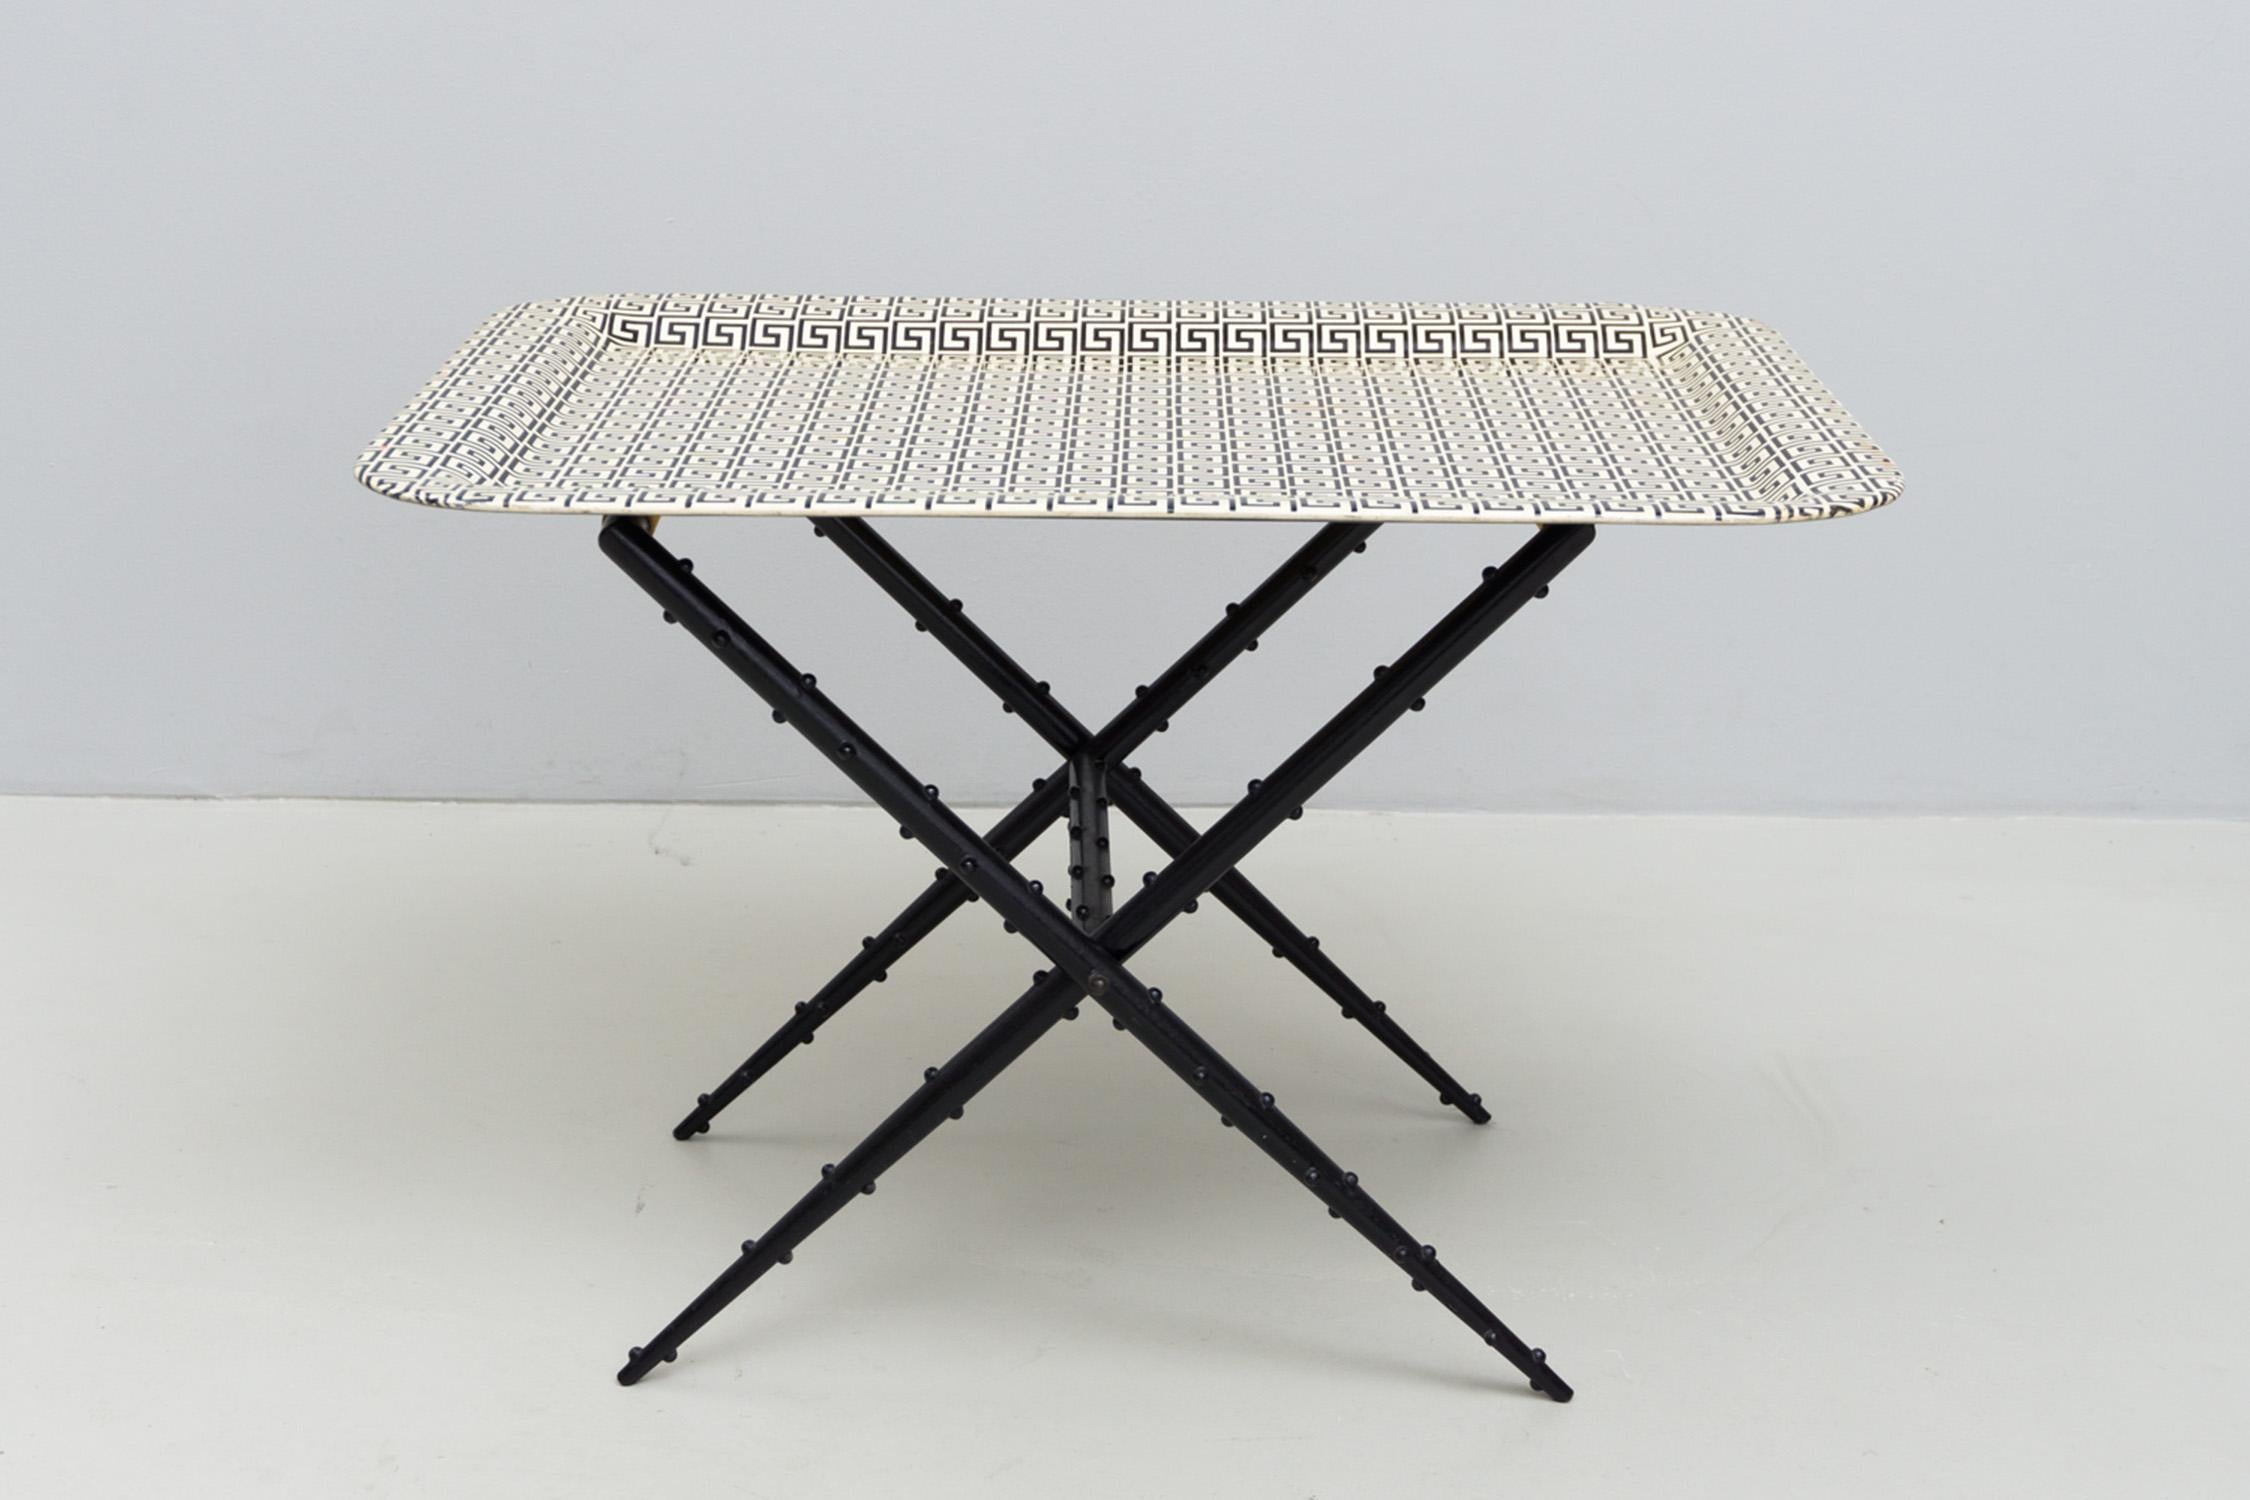 Extravagant tray table with a foldable structure made of enameled metal. Beautiful golden textile ribbons hold the printed tray. Tray in black and eggshell. Designed by Piero Fornasetti, 1950

Piero Fornasetti (Milan, 10 November 1913 - 15 October